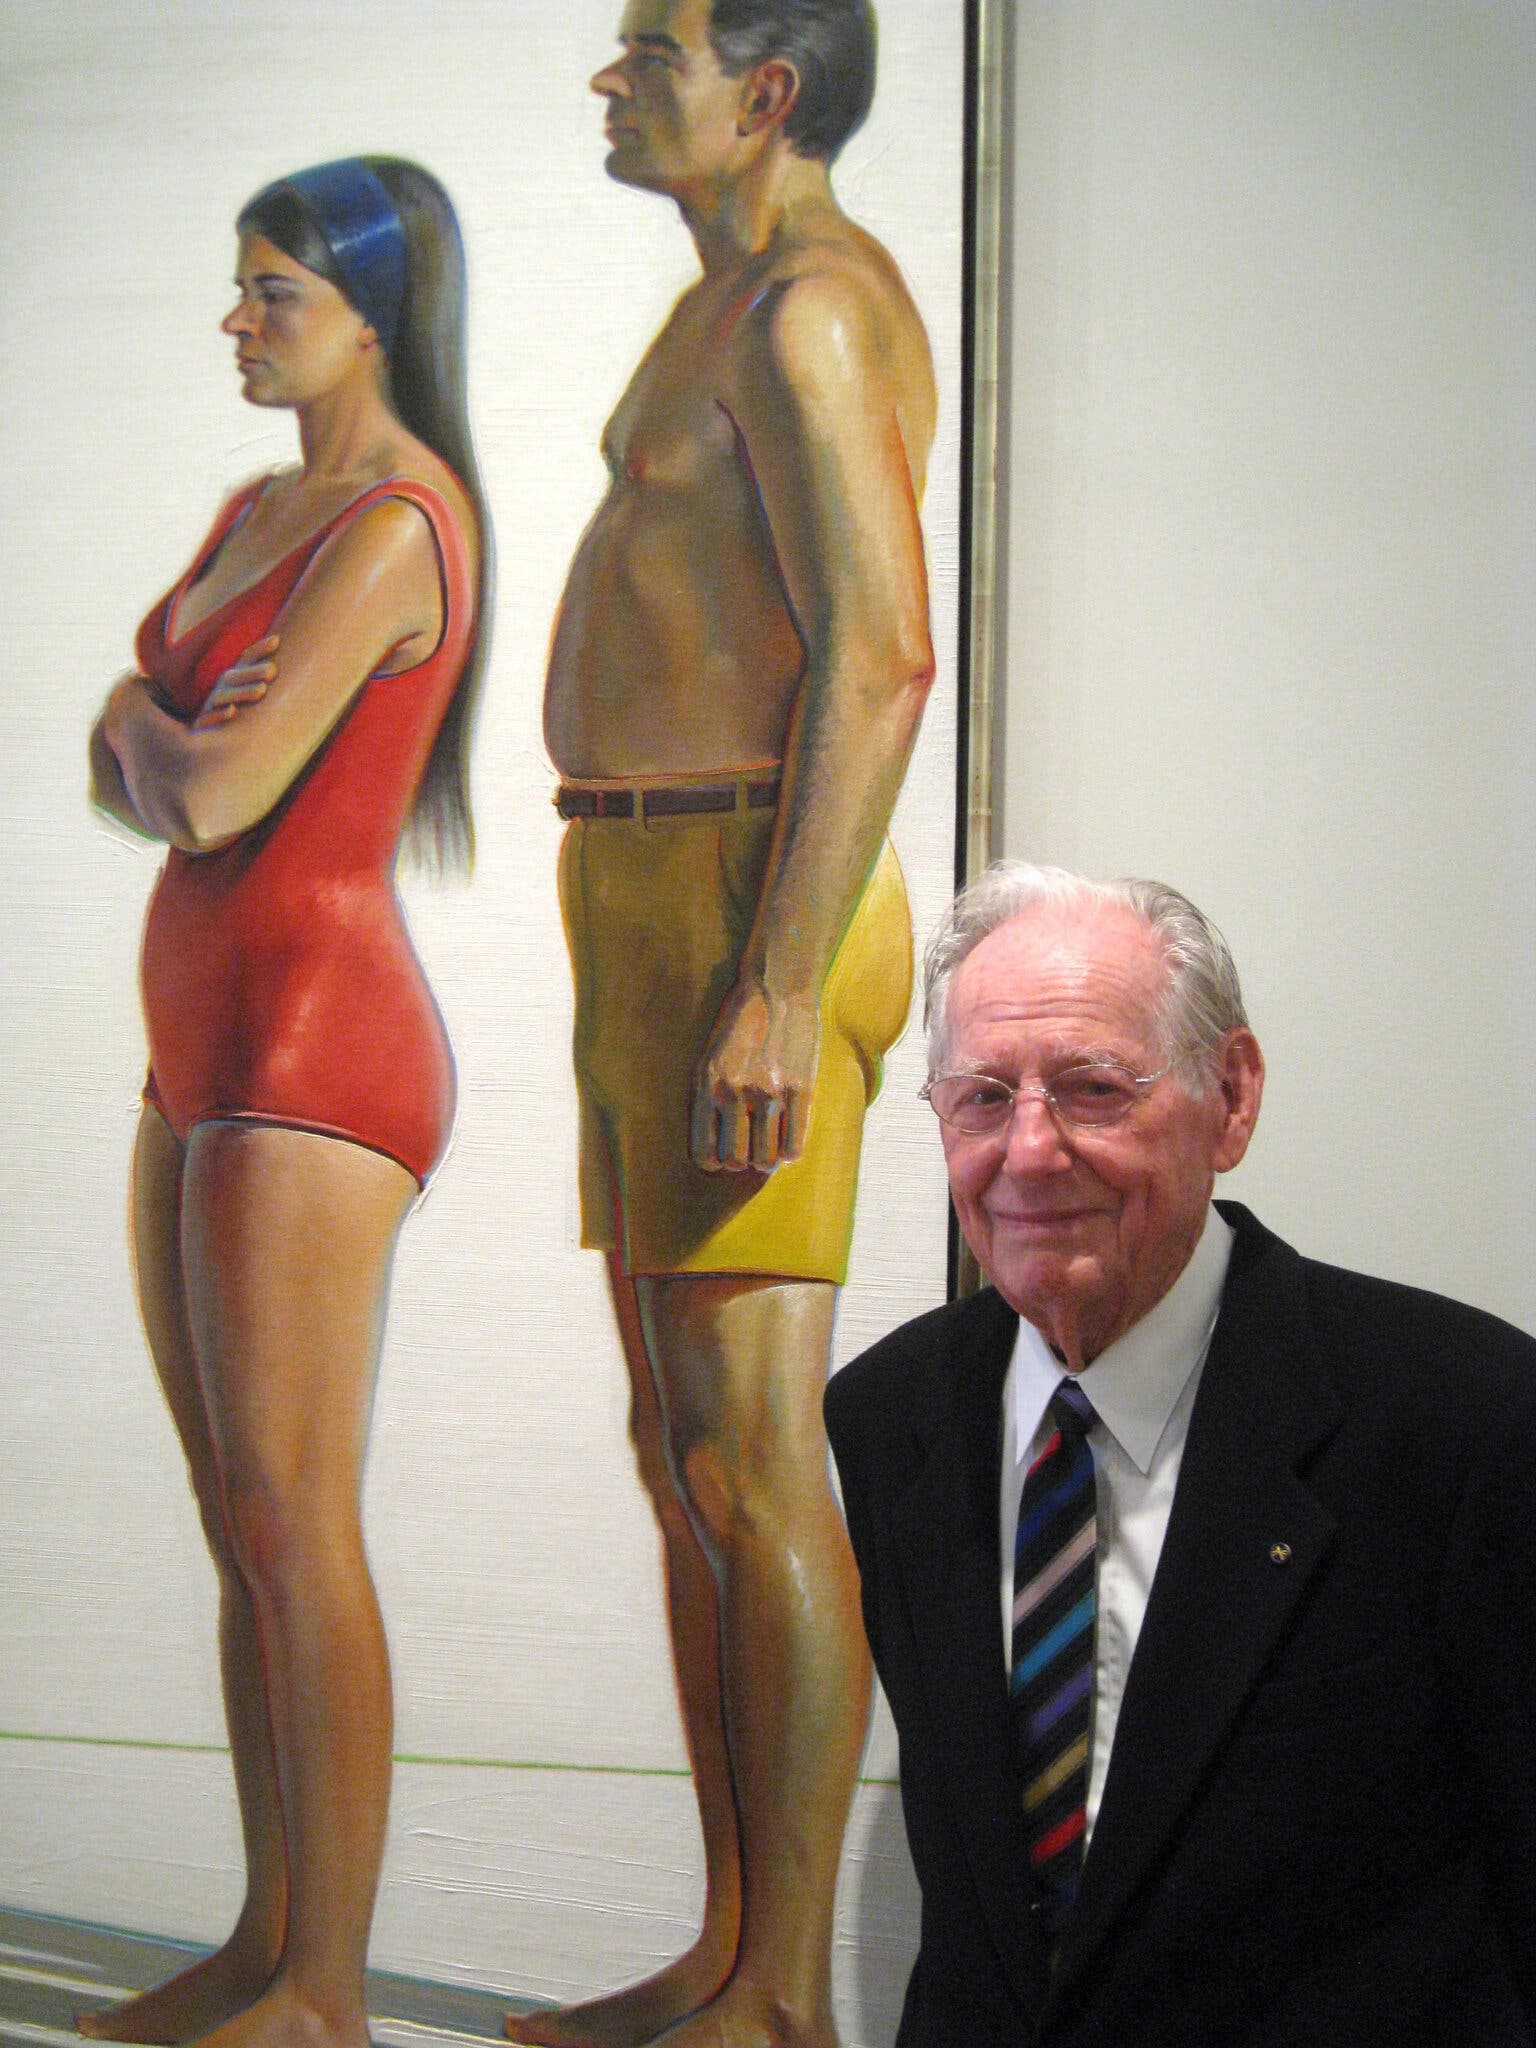 Mr. Thiebaud, with his painting “Swimsuit Figures,” was honored in 2017 at an event held by the American Academy of Arts and Letters.